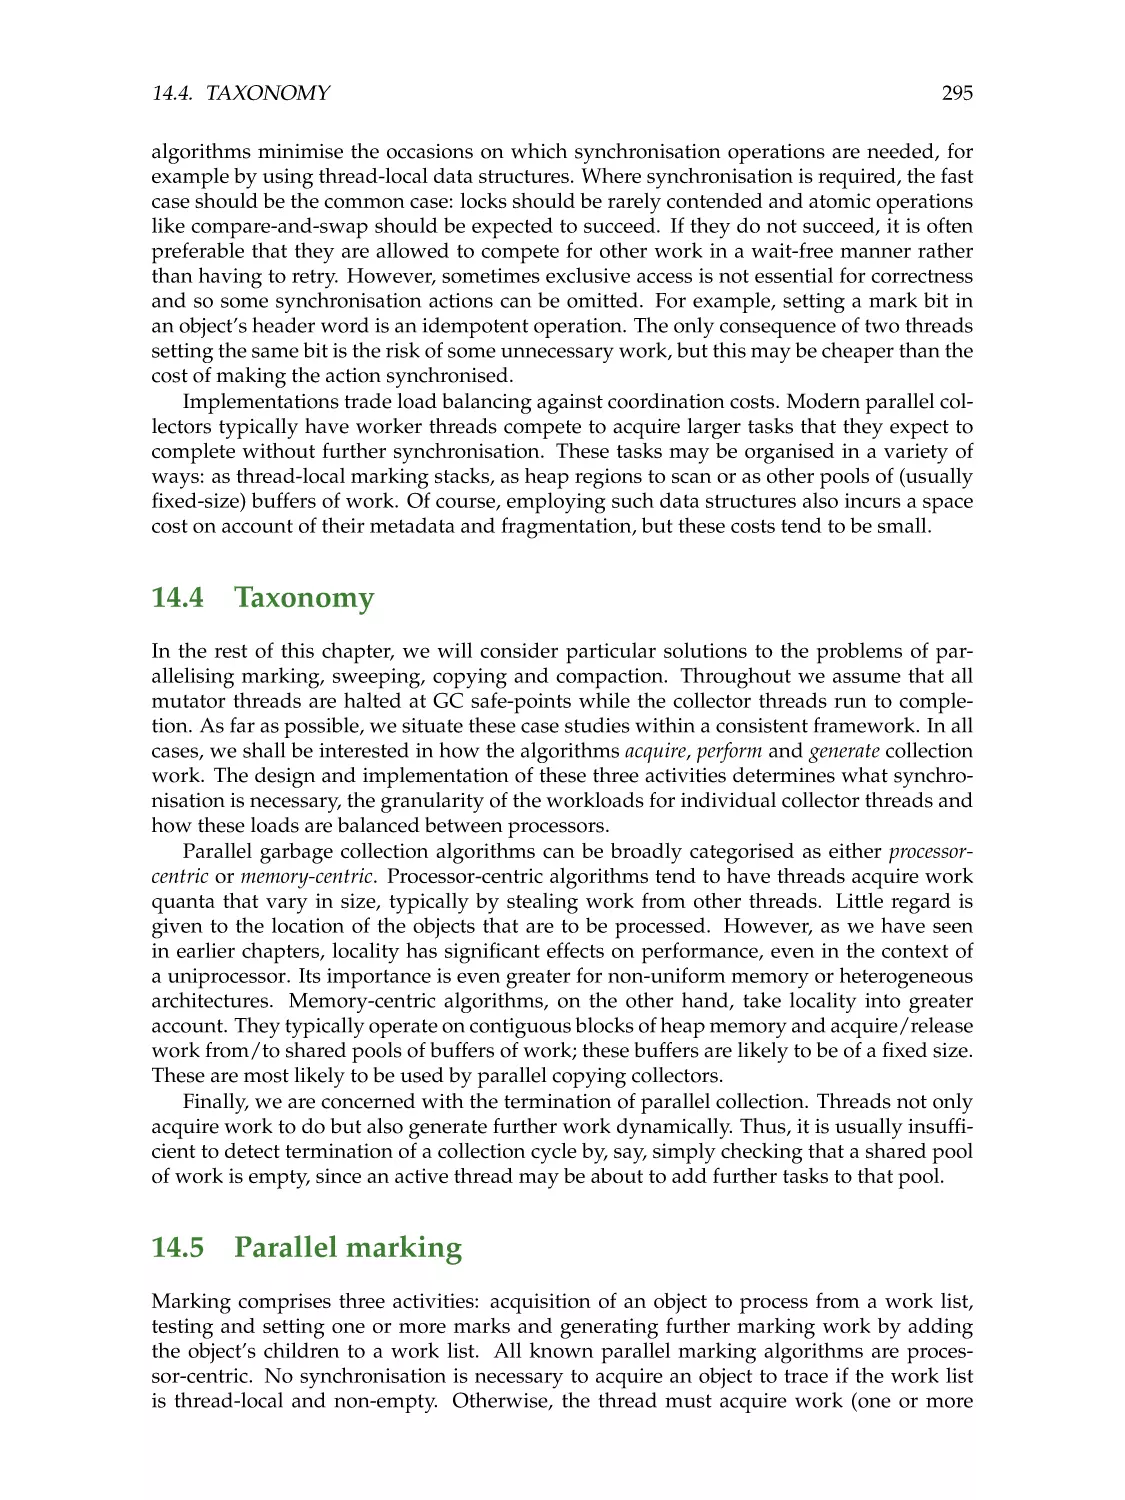 14.4. Taxonomy
14.5. Parallel marking